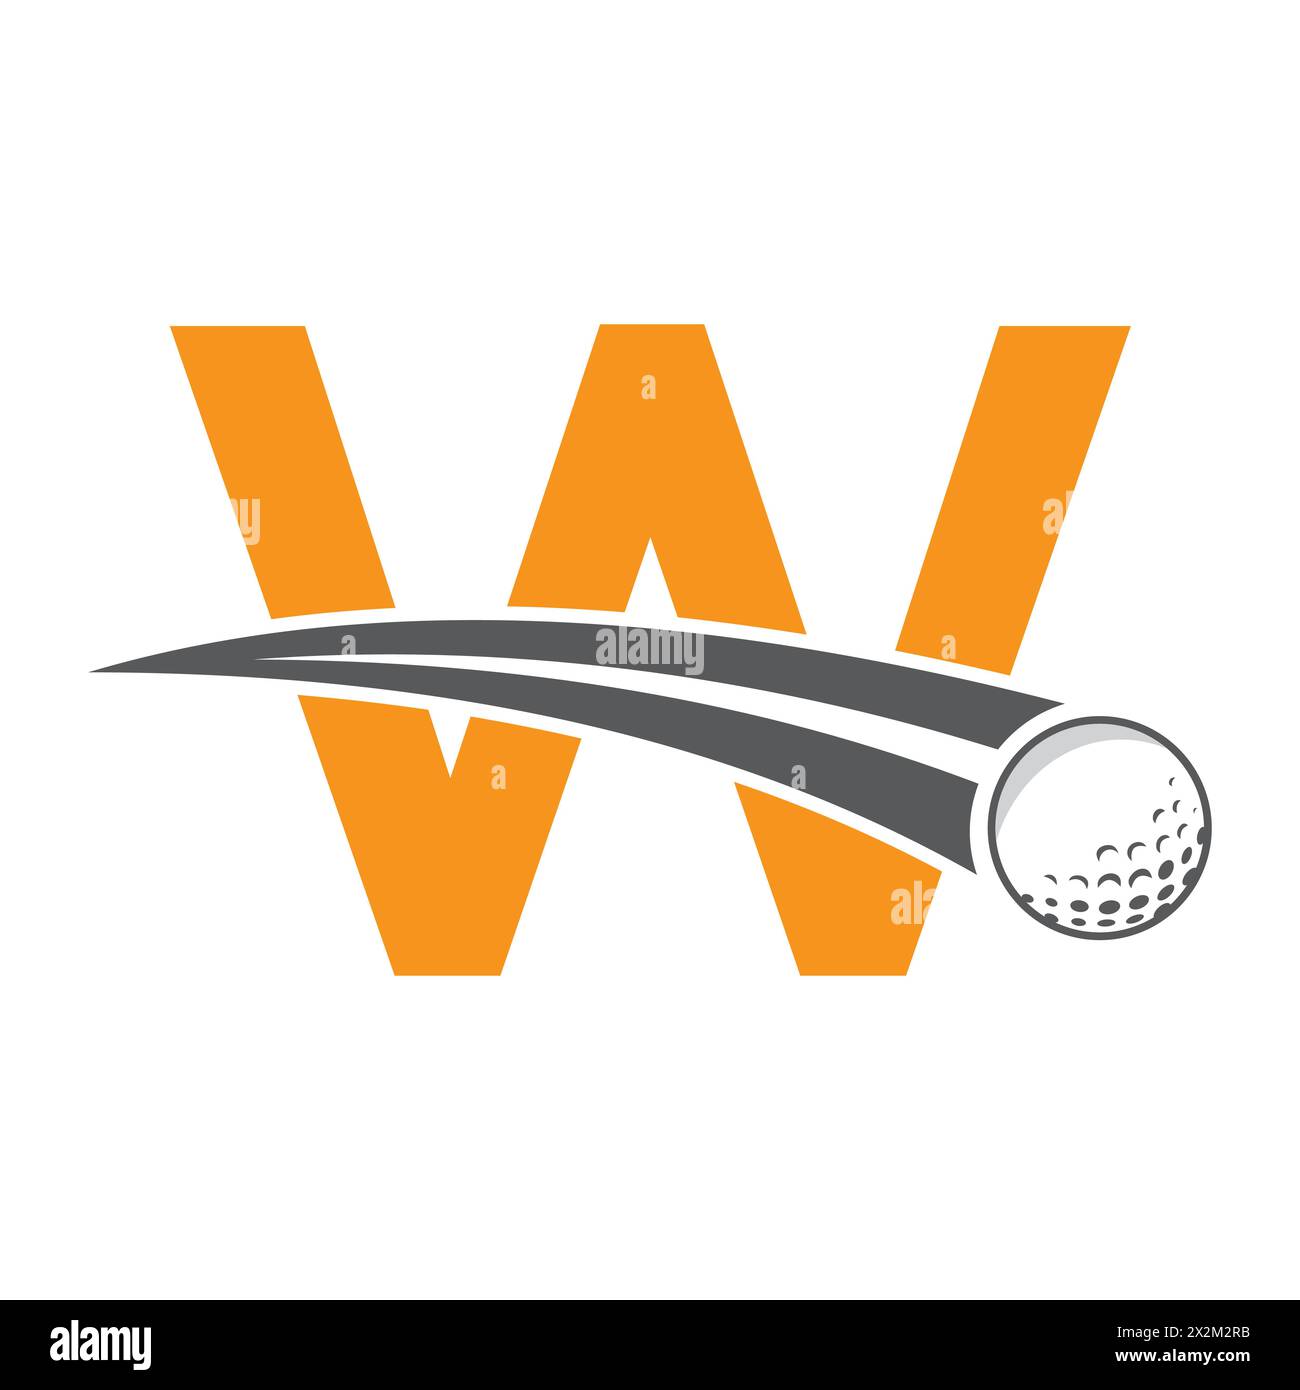 Golf Logo On Letter W Concept With Moving Golf ball Symbol. Hockey Sign Stock Vector